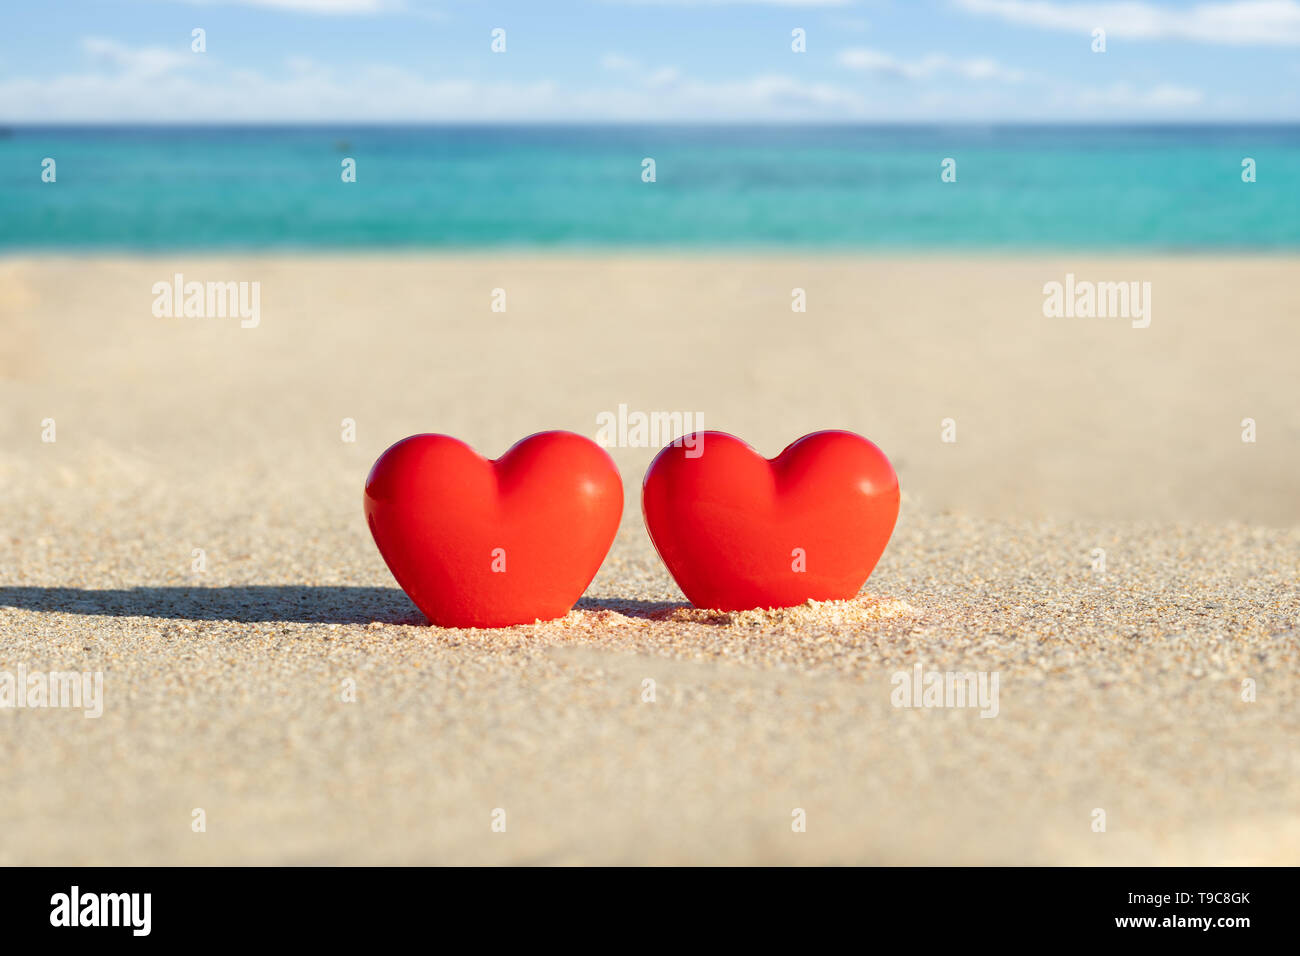 Close-up Of Two Red Heart Shape Dig On Sand At Beach Stock Photo